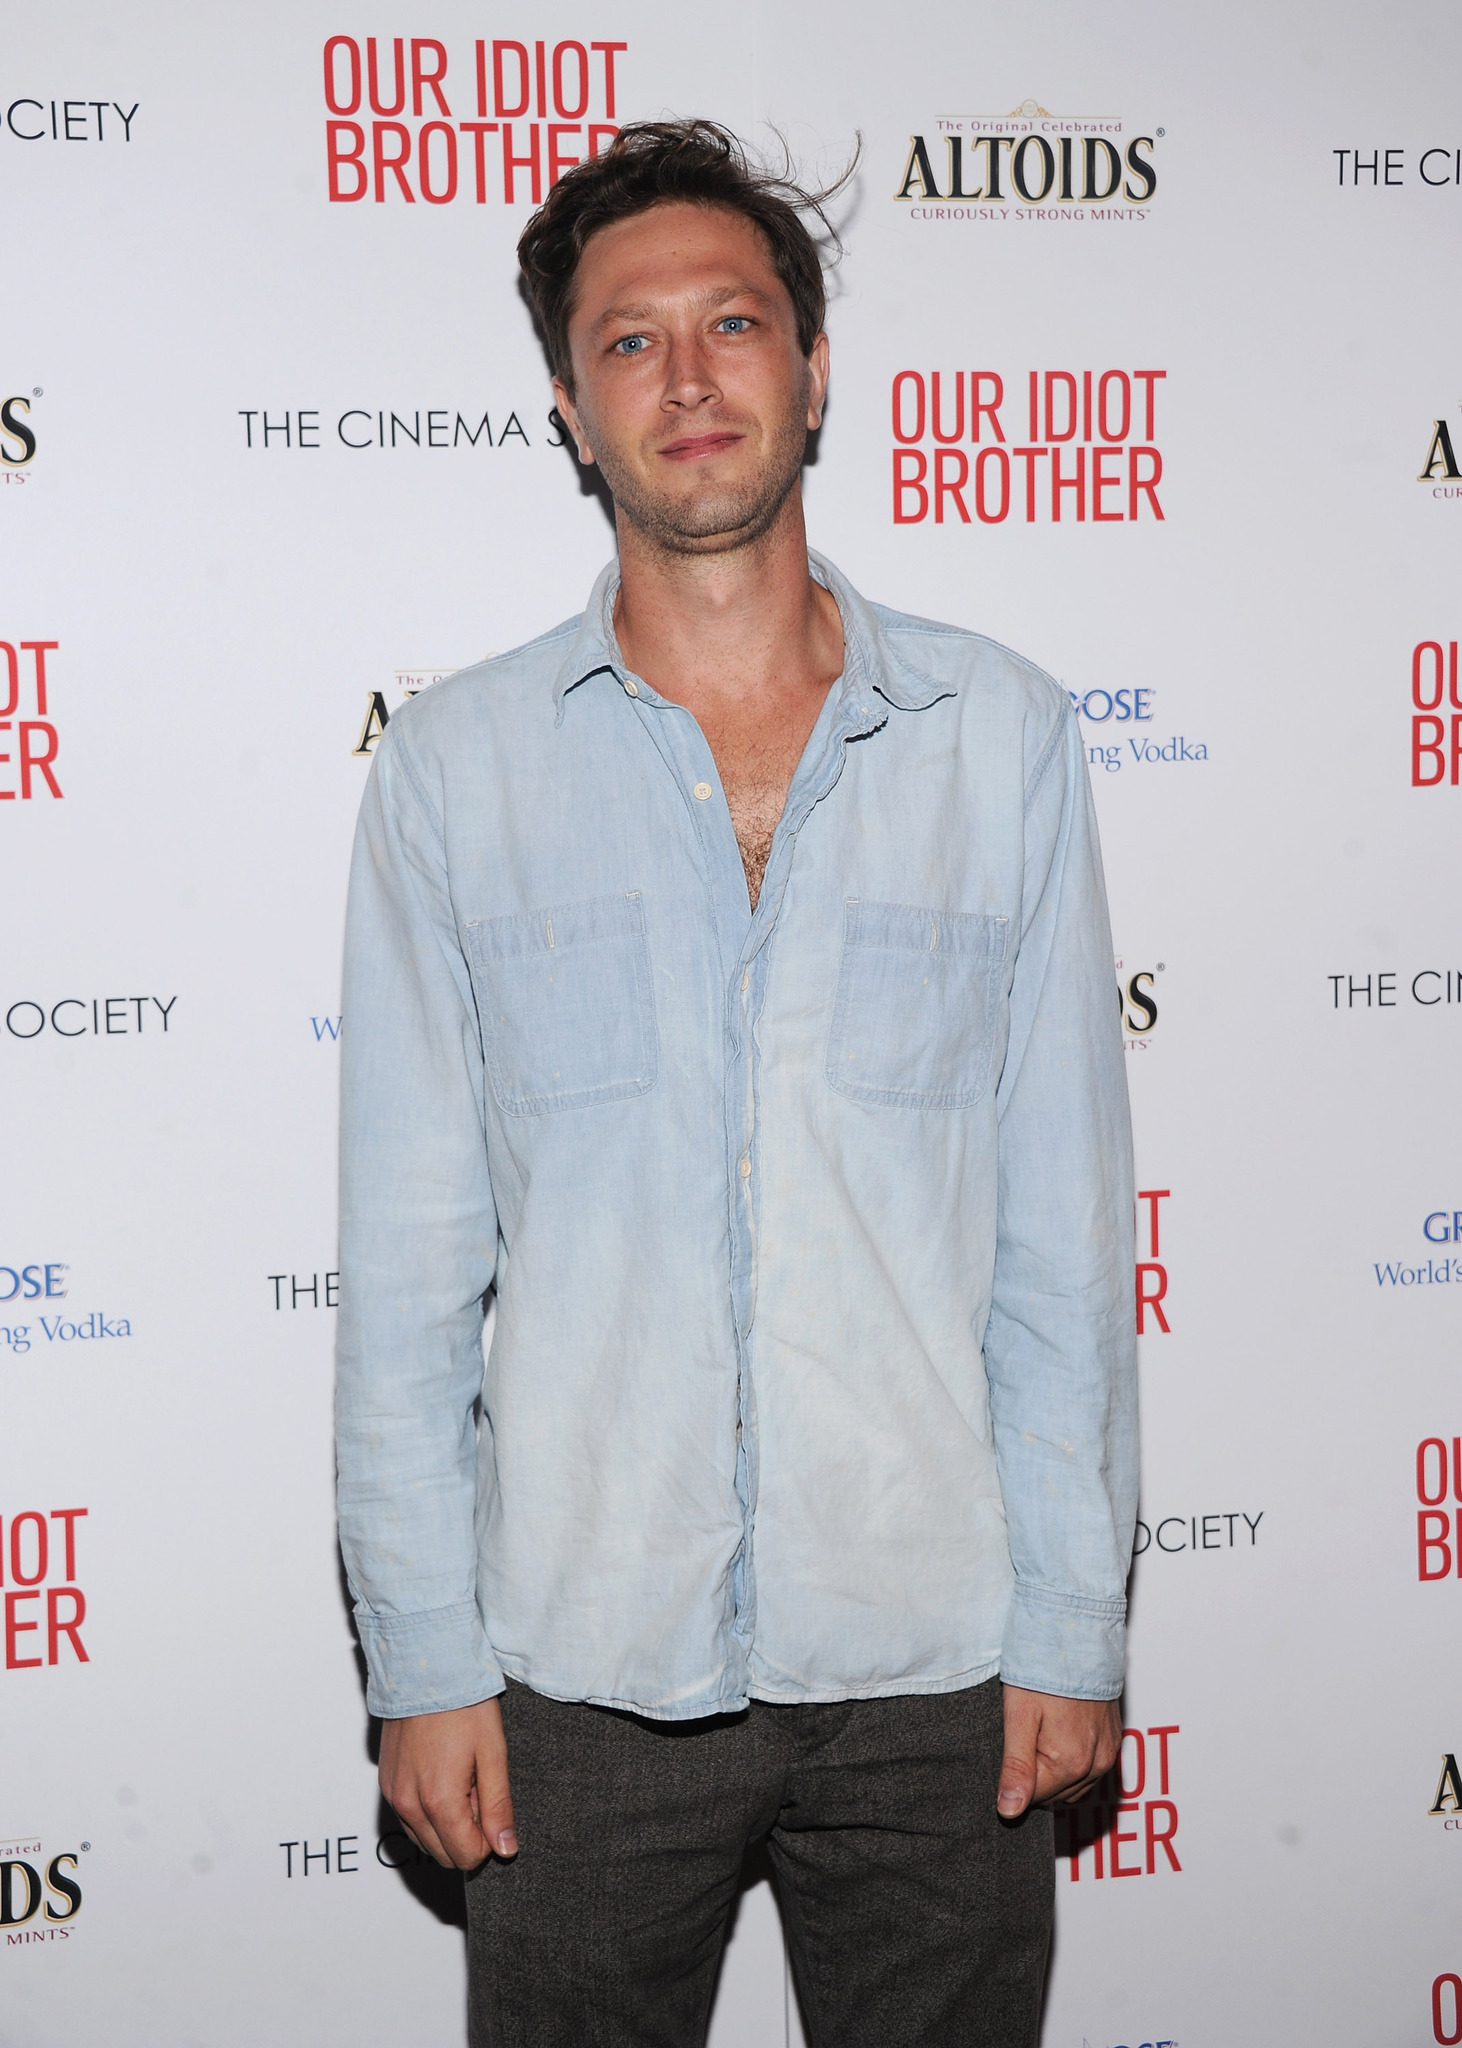 Ebon Moss-Bachrach at event of Our Idiot Brother (2011)